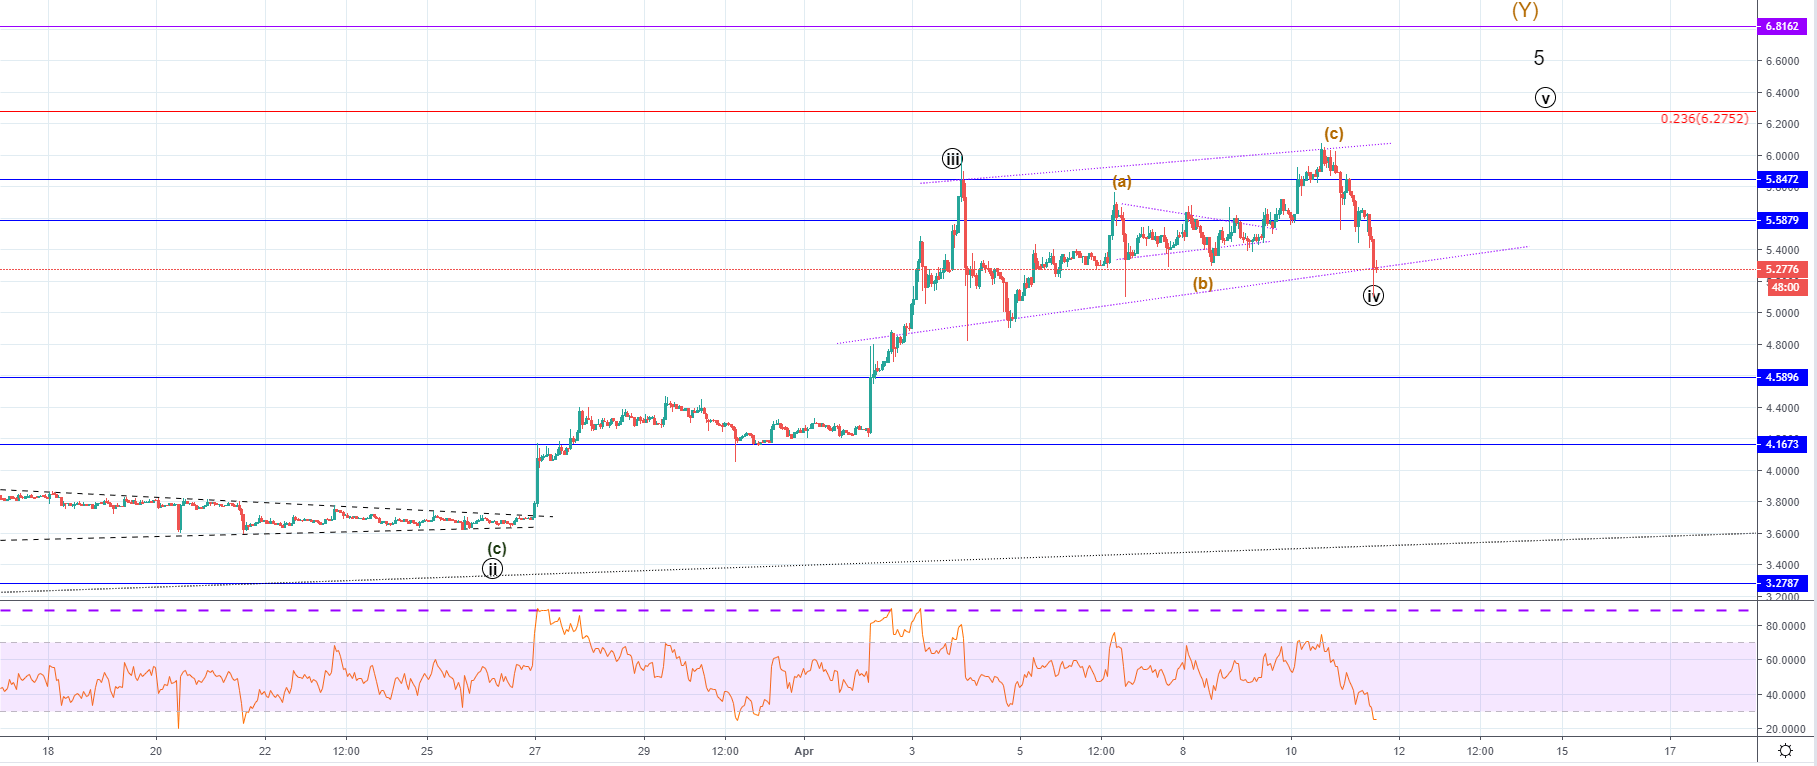 LTC/USD and EOS/USD in a corrective downward move